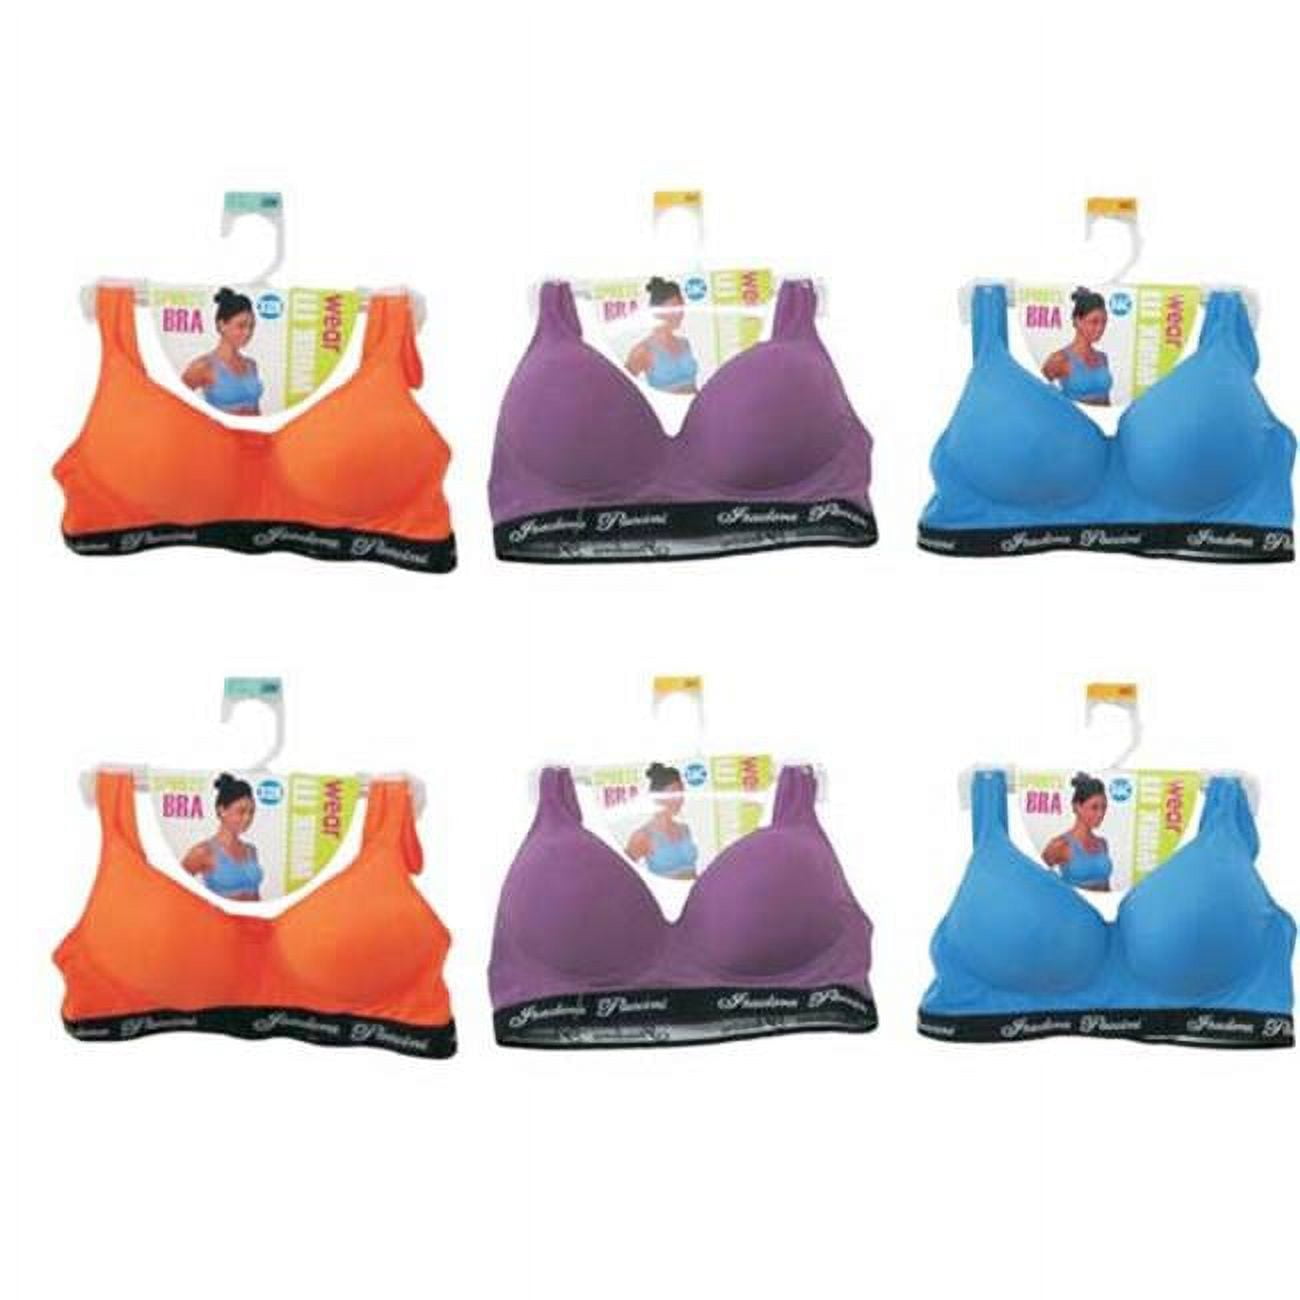 Eros G2234N Womens Sports Bras - Bright Colors - Pack of 72 